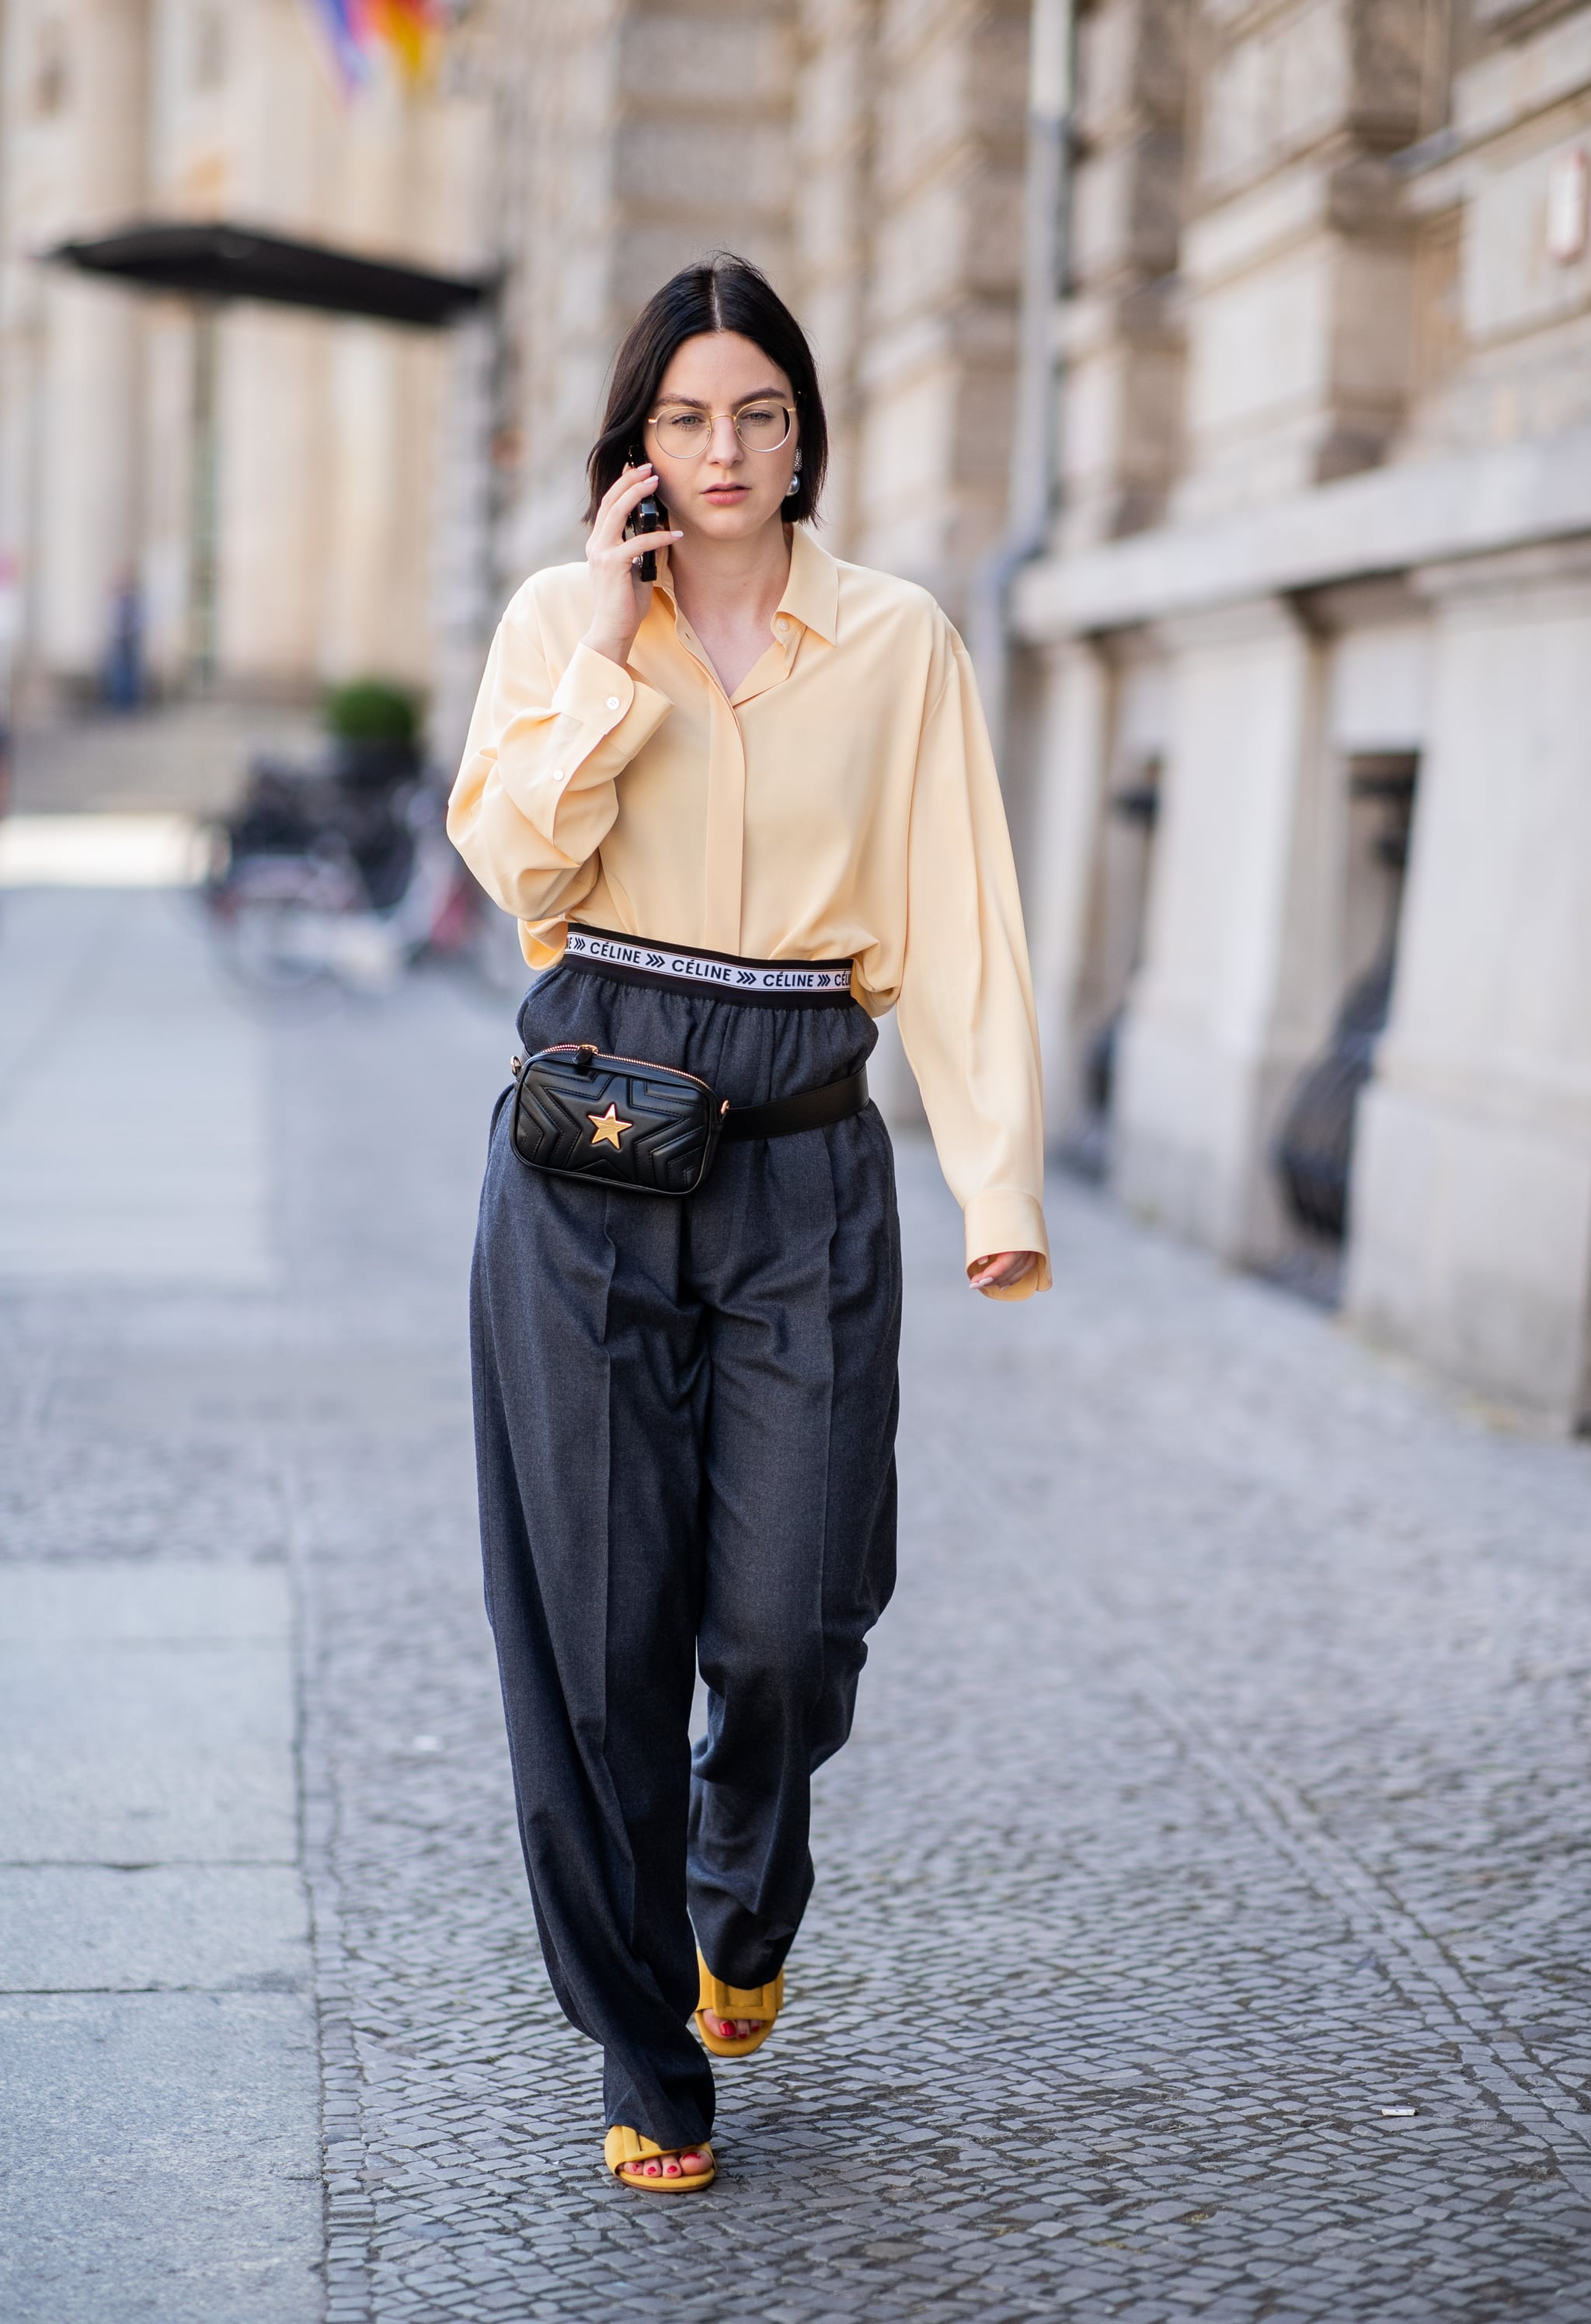 Shake up a classic with bold and a belt bag. | 33 Looks That'll Make You Total Convert High-Waisted Pants | POPSUGAR Fashion Photo 7